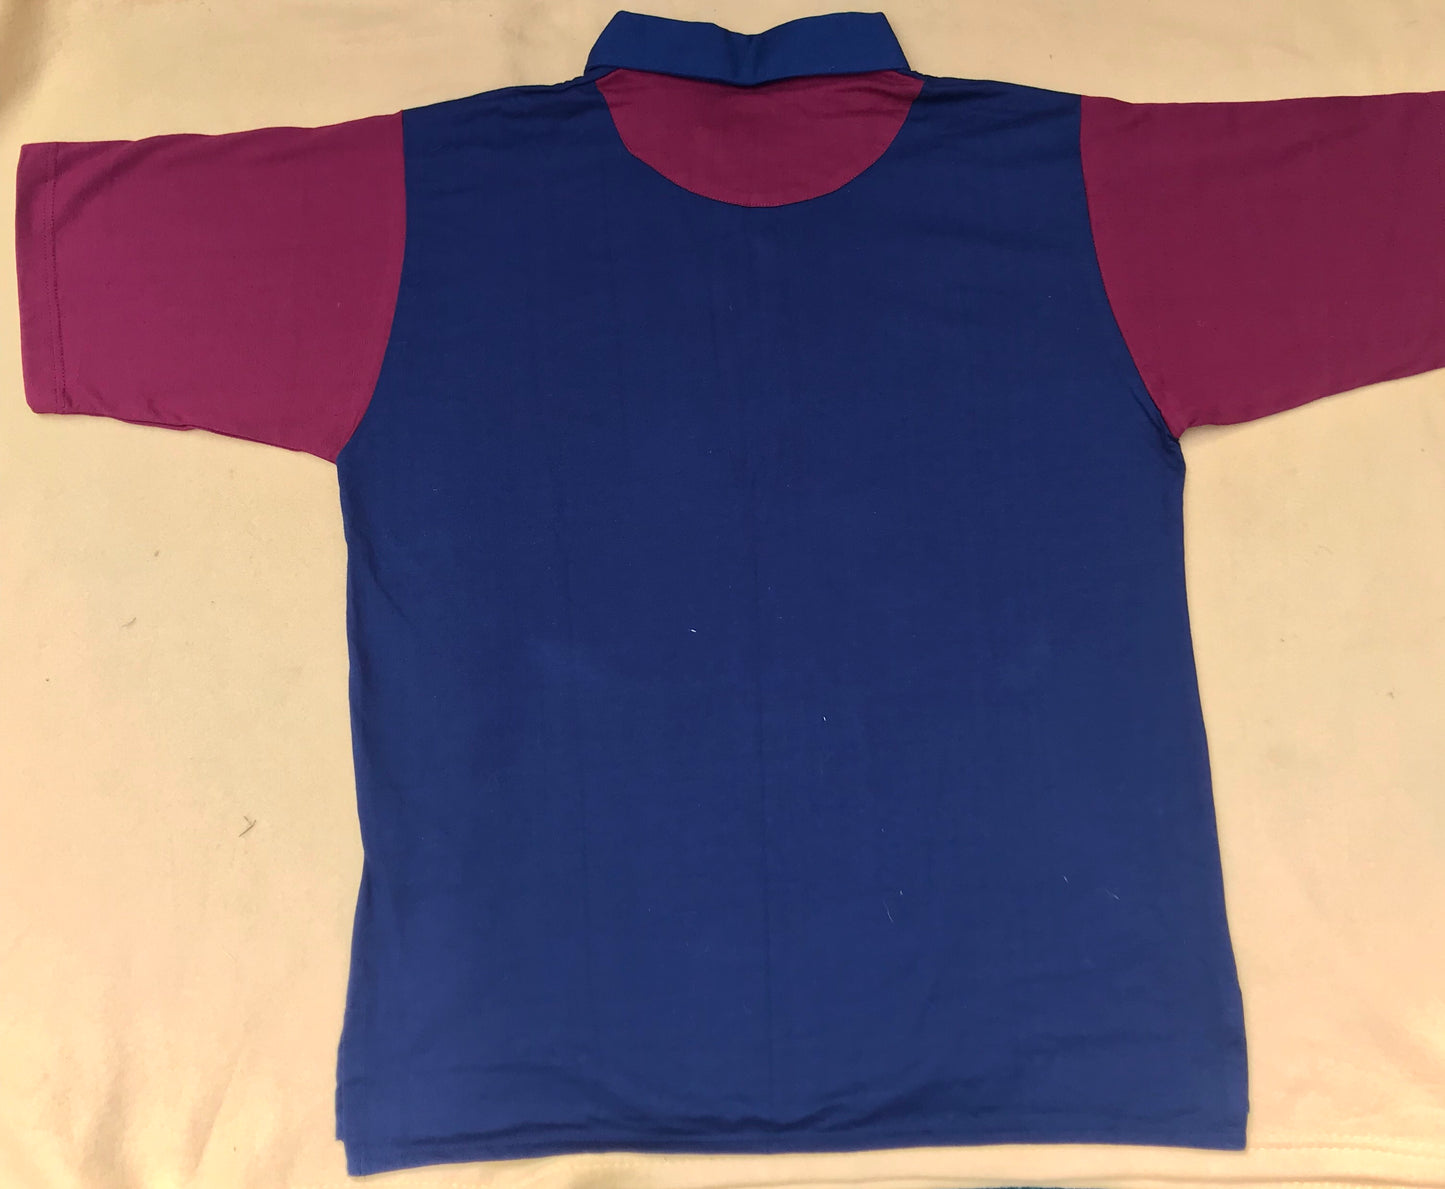 Hac-Tac Blue and Red short sleeve NEW WITH TAGS Size Small FREE POSTAGE